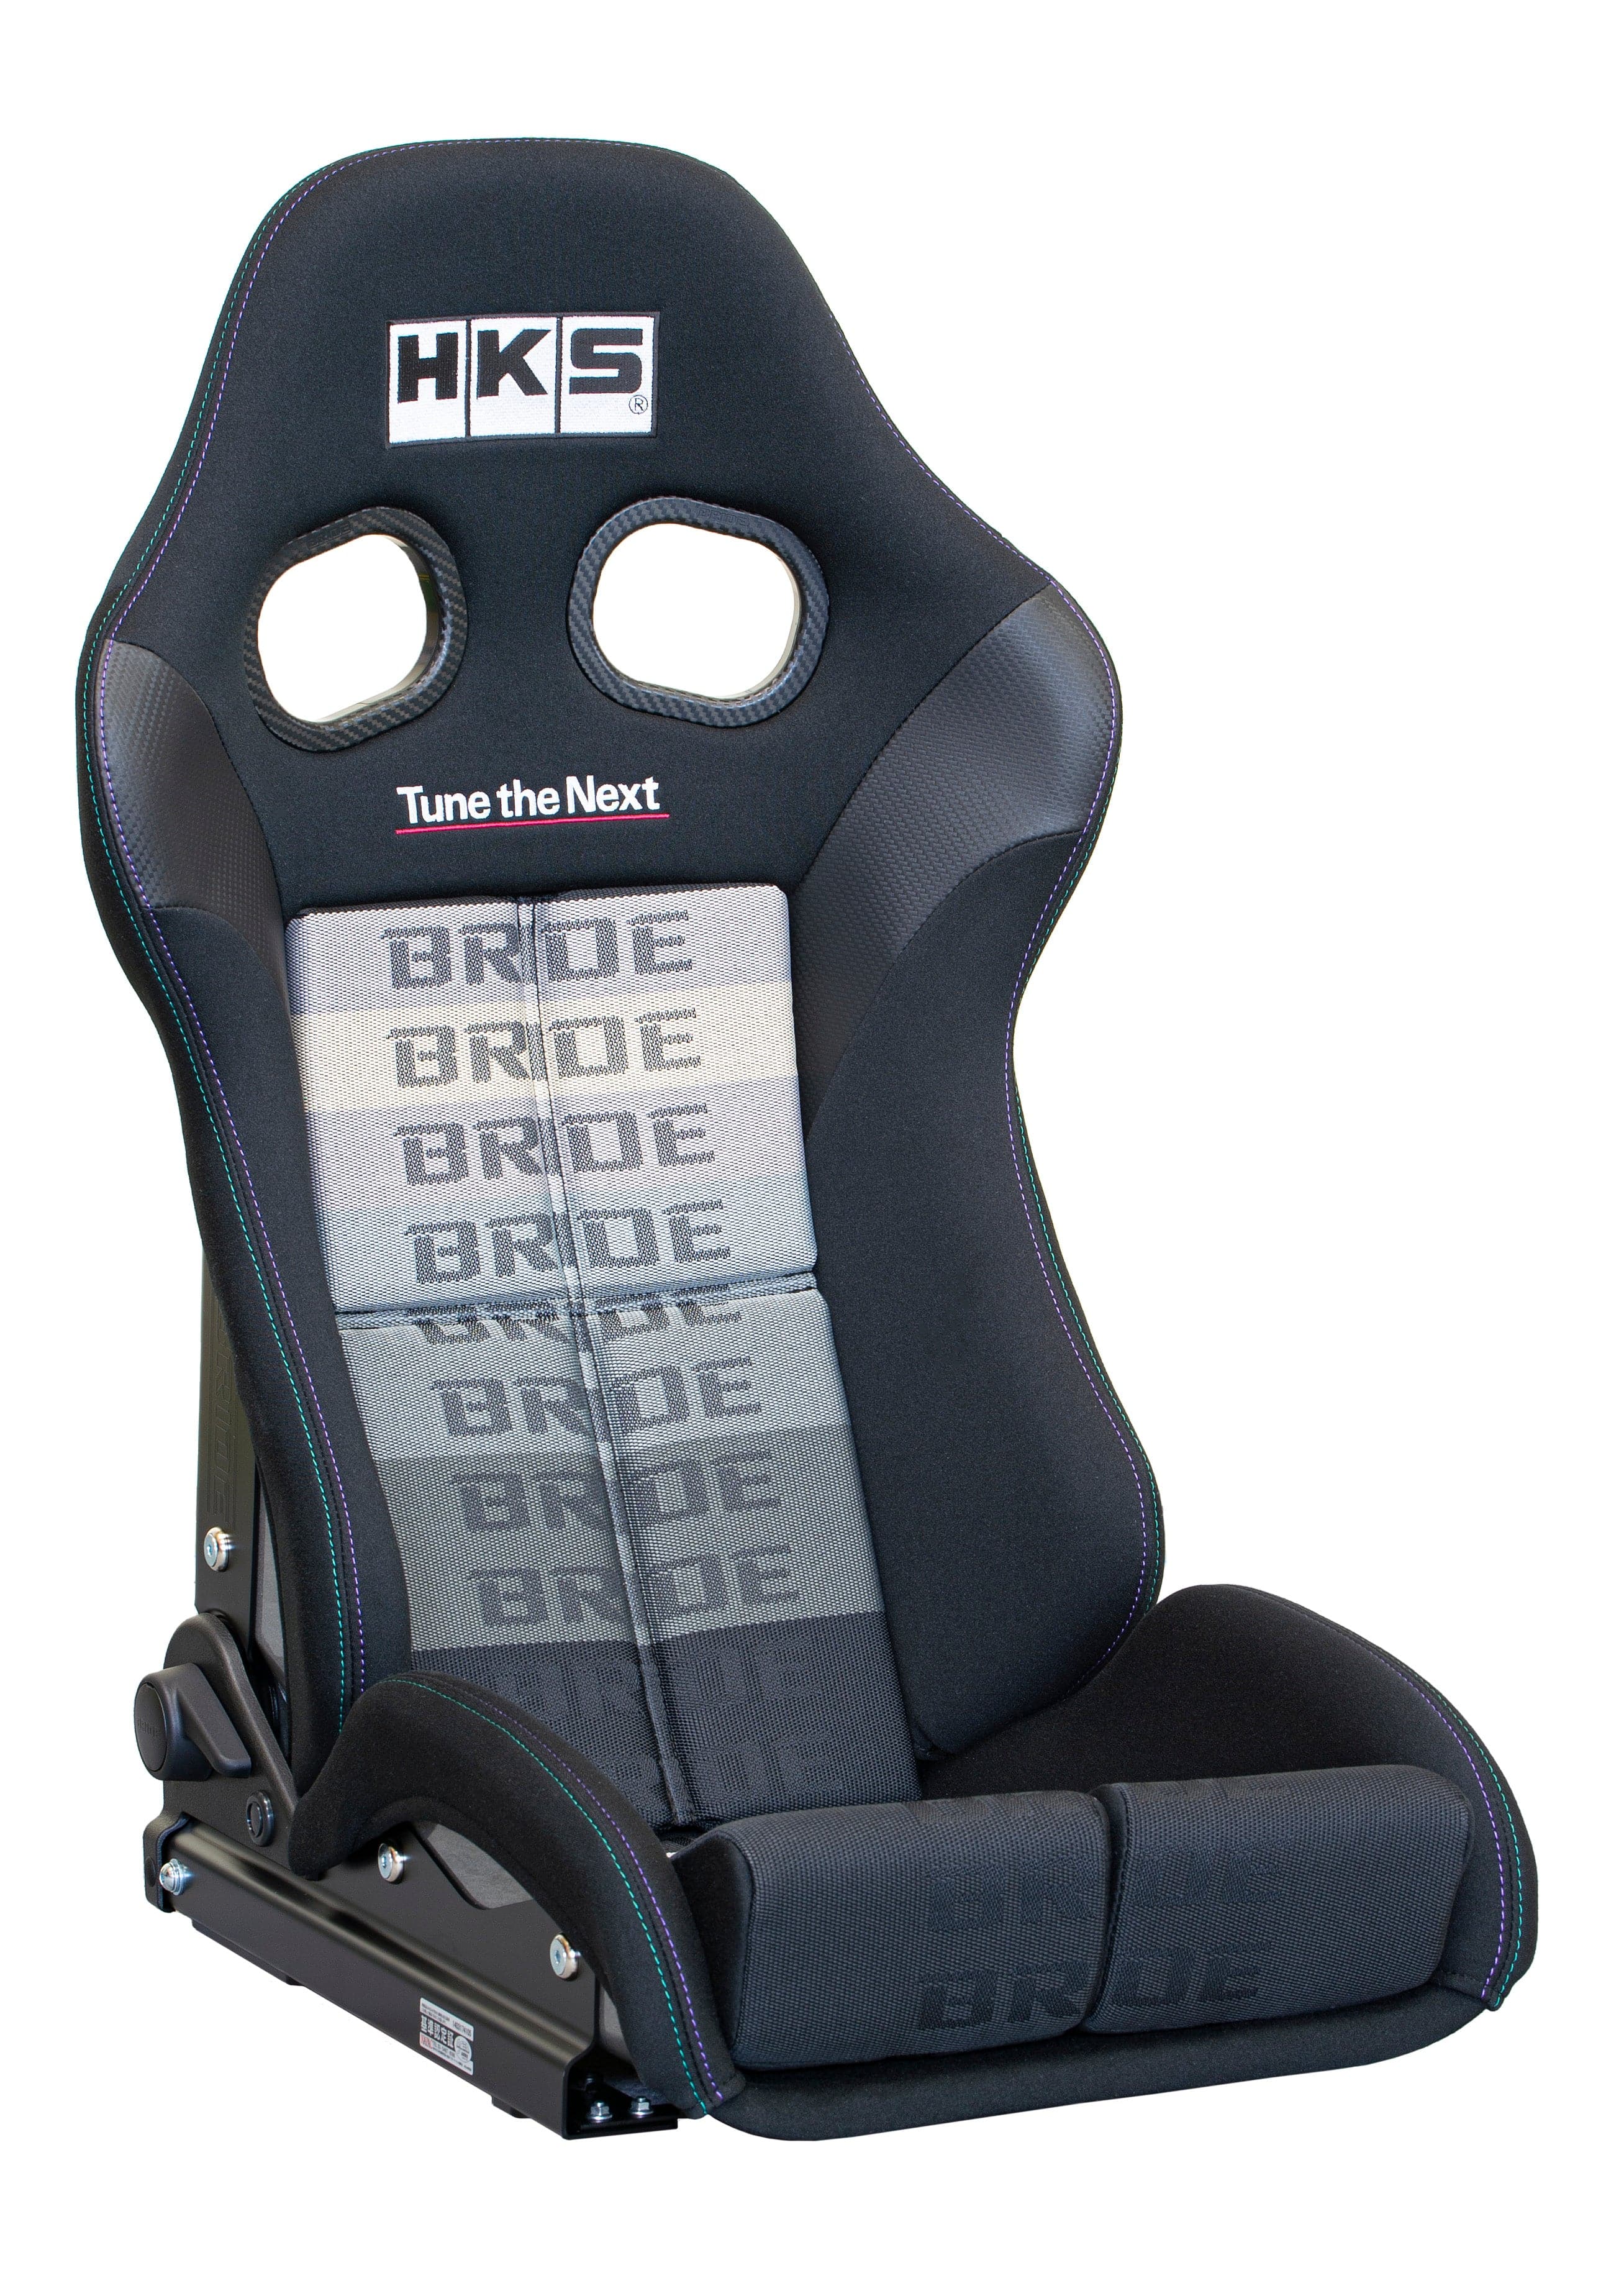 HKS 50TH ANNIVERSARY LIMITED EDITION STRADIA III RECLINABLE SEAT